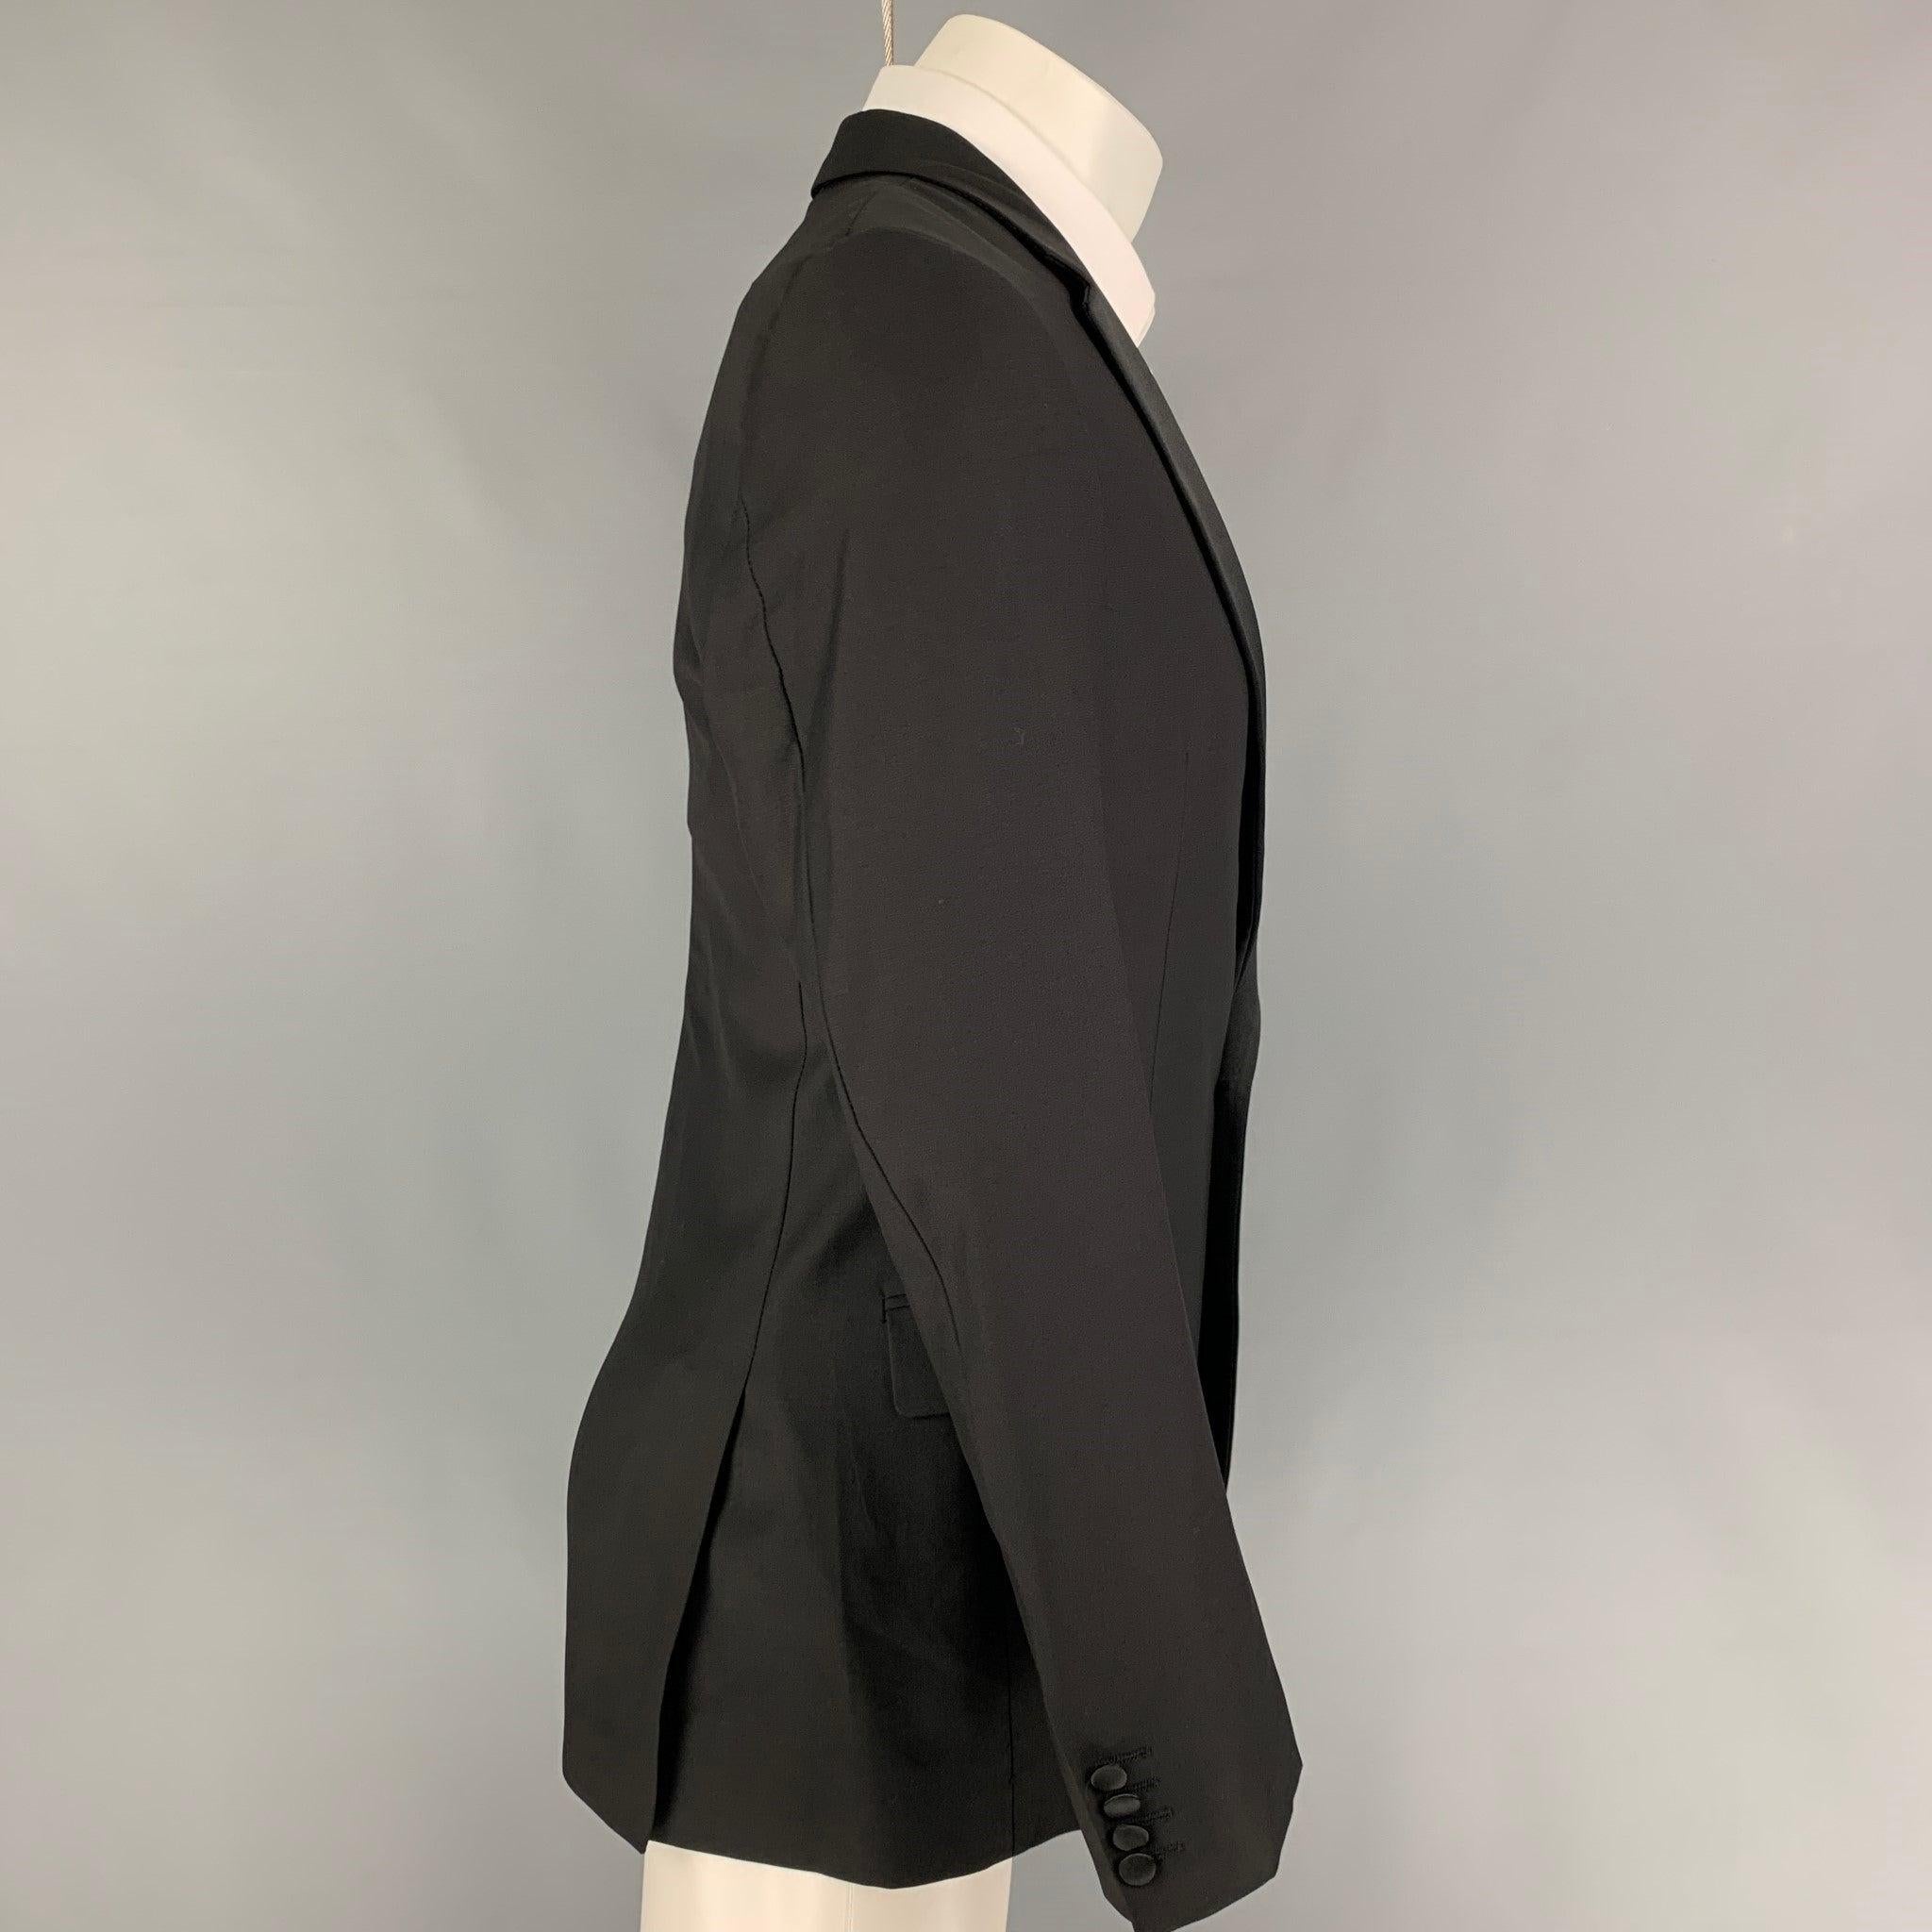 CALVIN KLEIN COLLECTION tuxedo sport coat comes in a black wool with a full liner featuring a notch lapel, flap pockets, double back vent, an a single button closure.
Very Good
Pre-Owned Condition. 

Marked:   48/38 

Measurements: 
 
Shoulder: 17.5